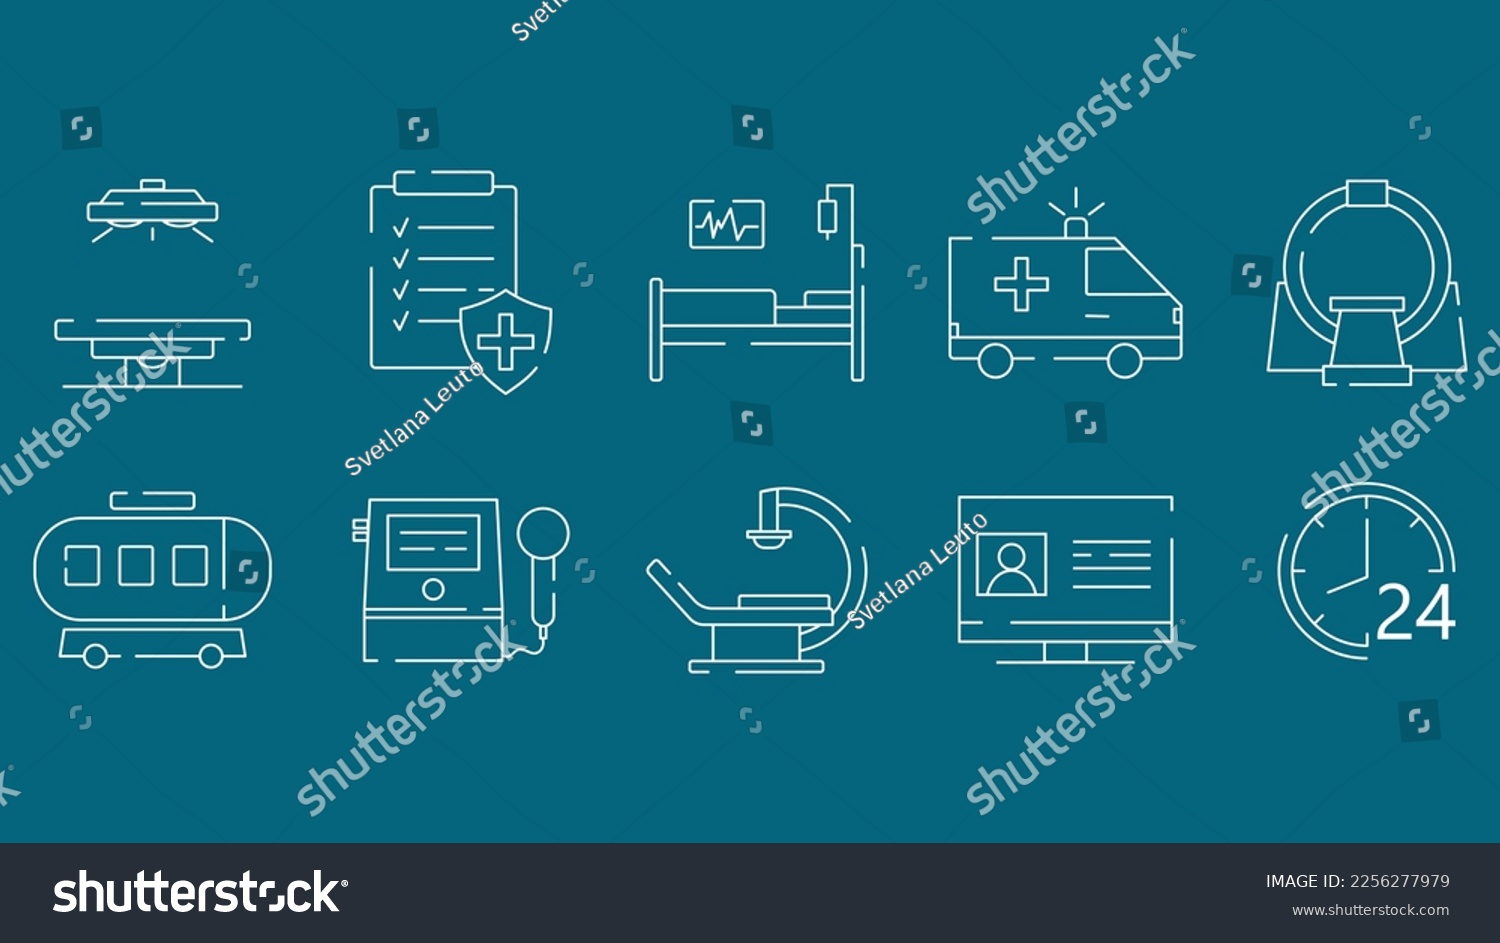 SVG of a set of simple vector icons for a medical website, medical tests and procedures, doodle and sketsh, hospital  svg